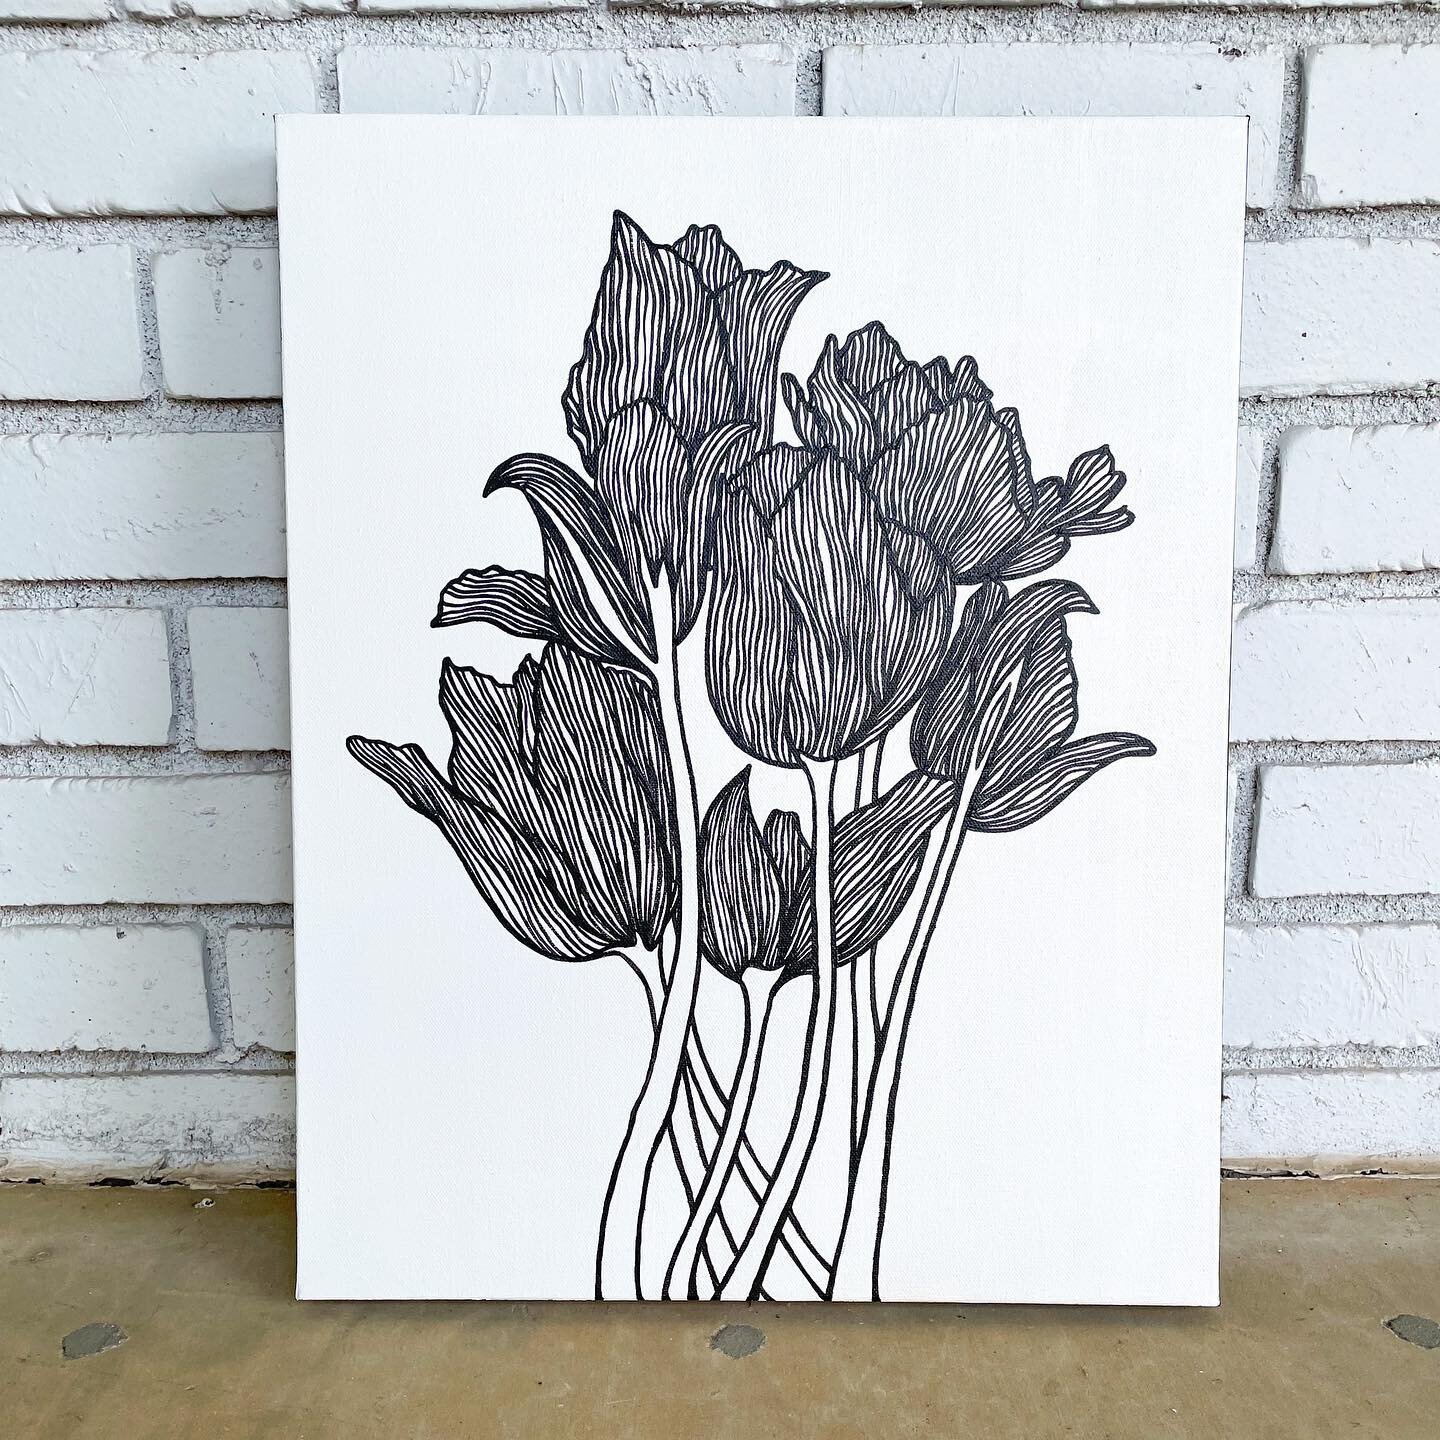 I&rsquo;m loving painting these black and white flowers! I dropped this piece off last week, it makes me so happy! 💐😊